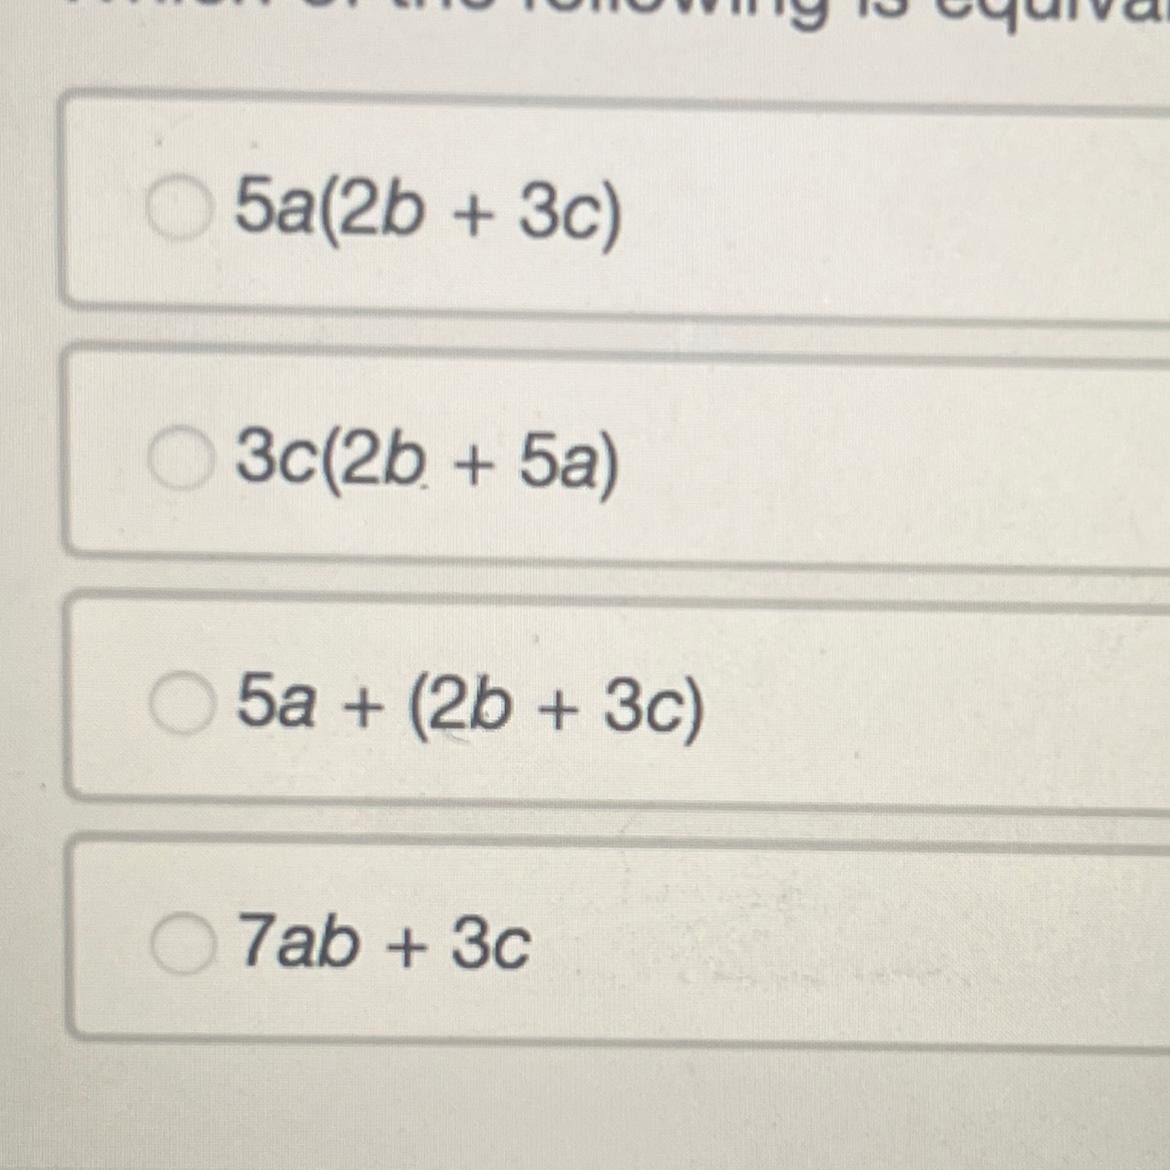 Which Of The Following Is Equivalent To (5a + 2b) + 3c? 